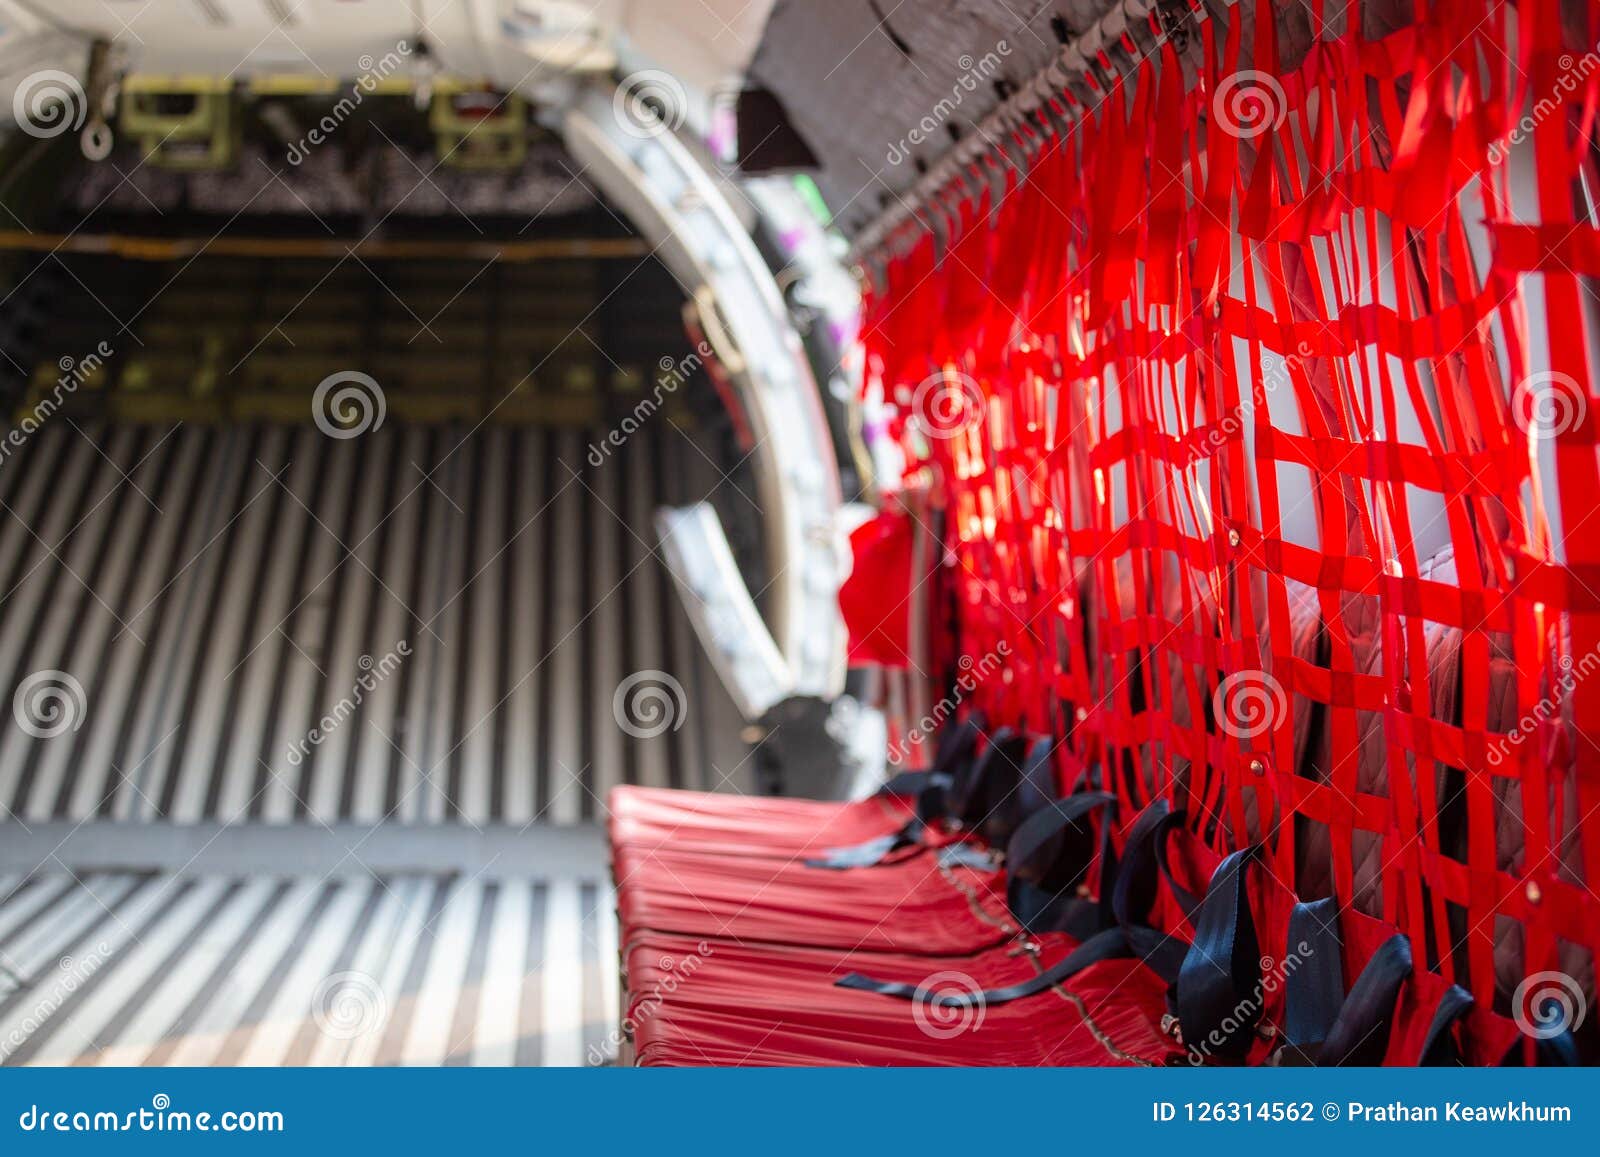 red seat with seatbelt for paratrooper or airborn forces in military transport aircraft cabin